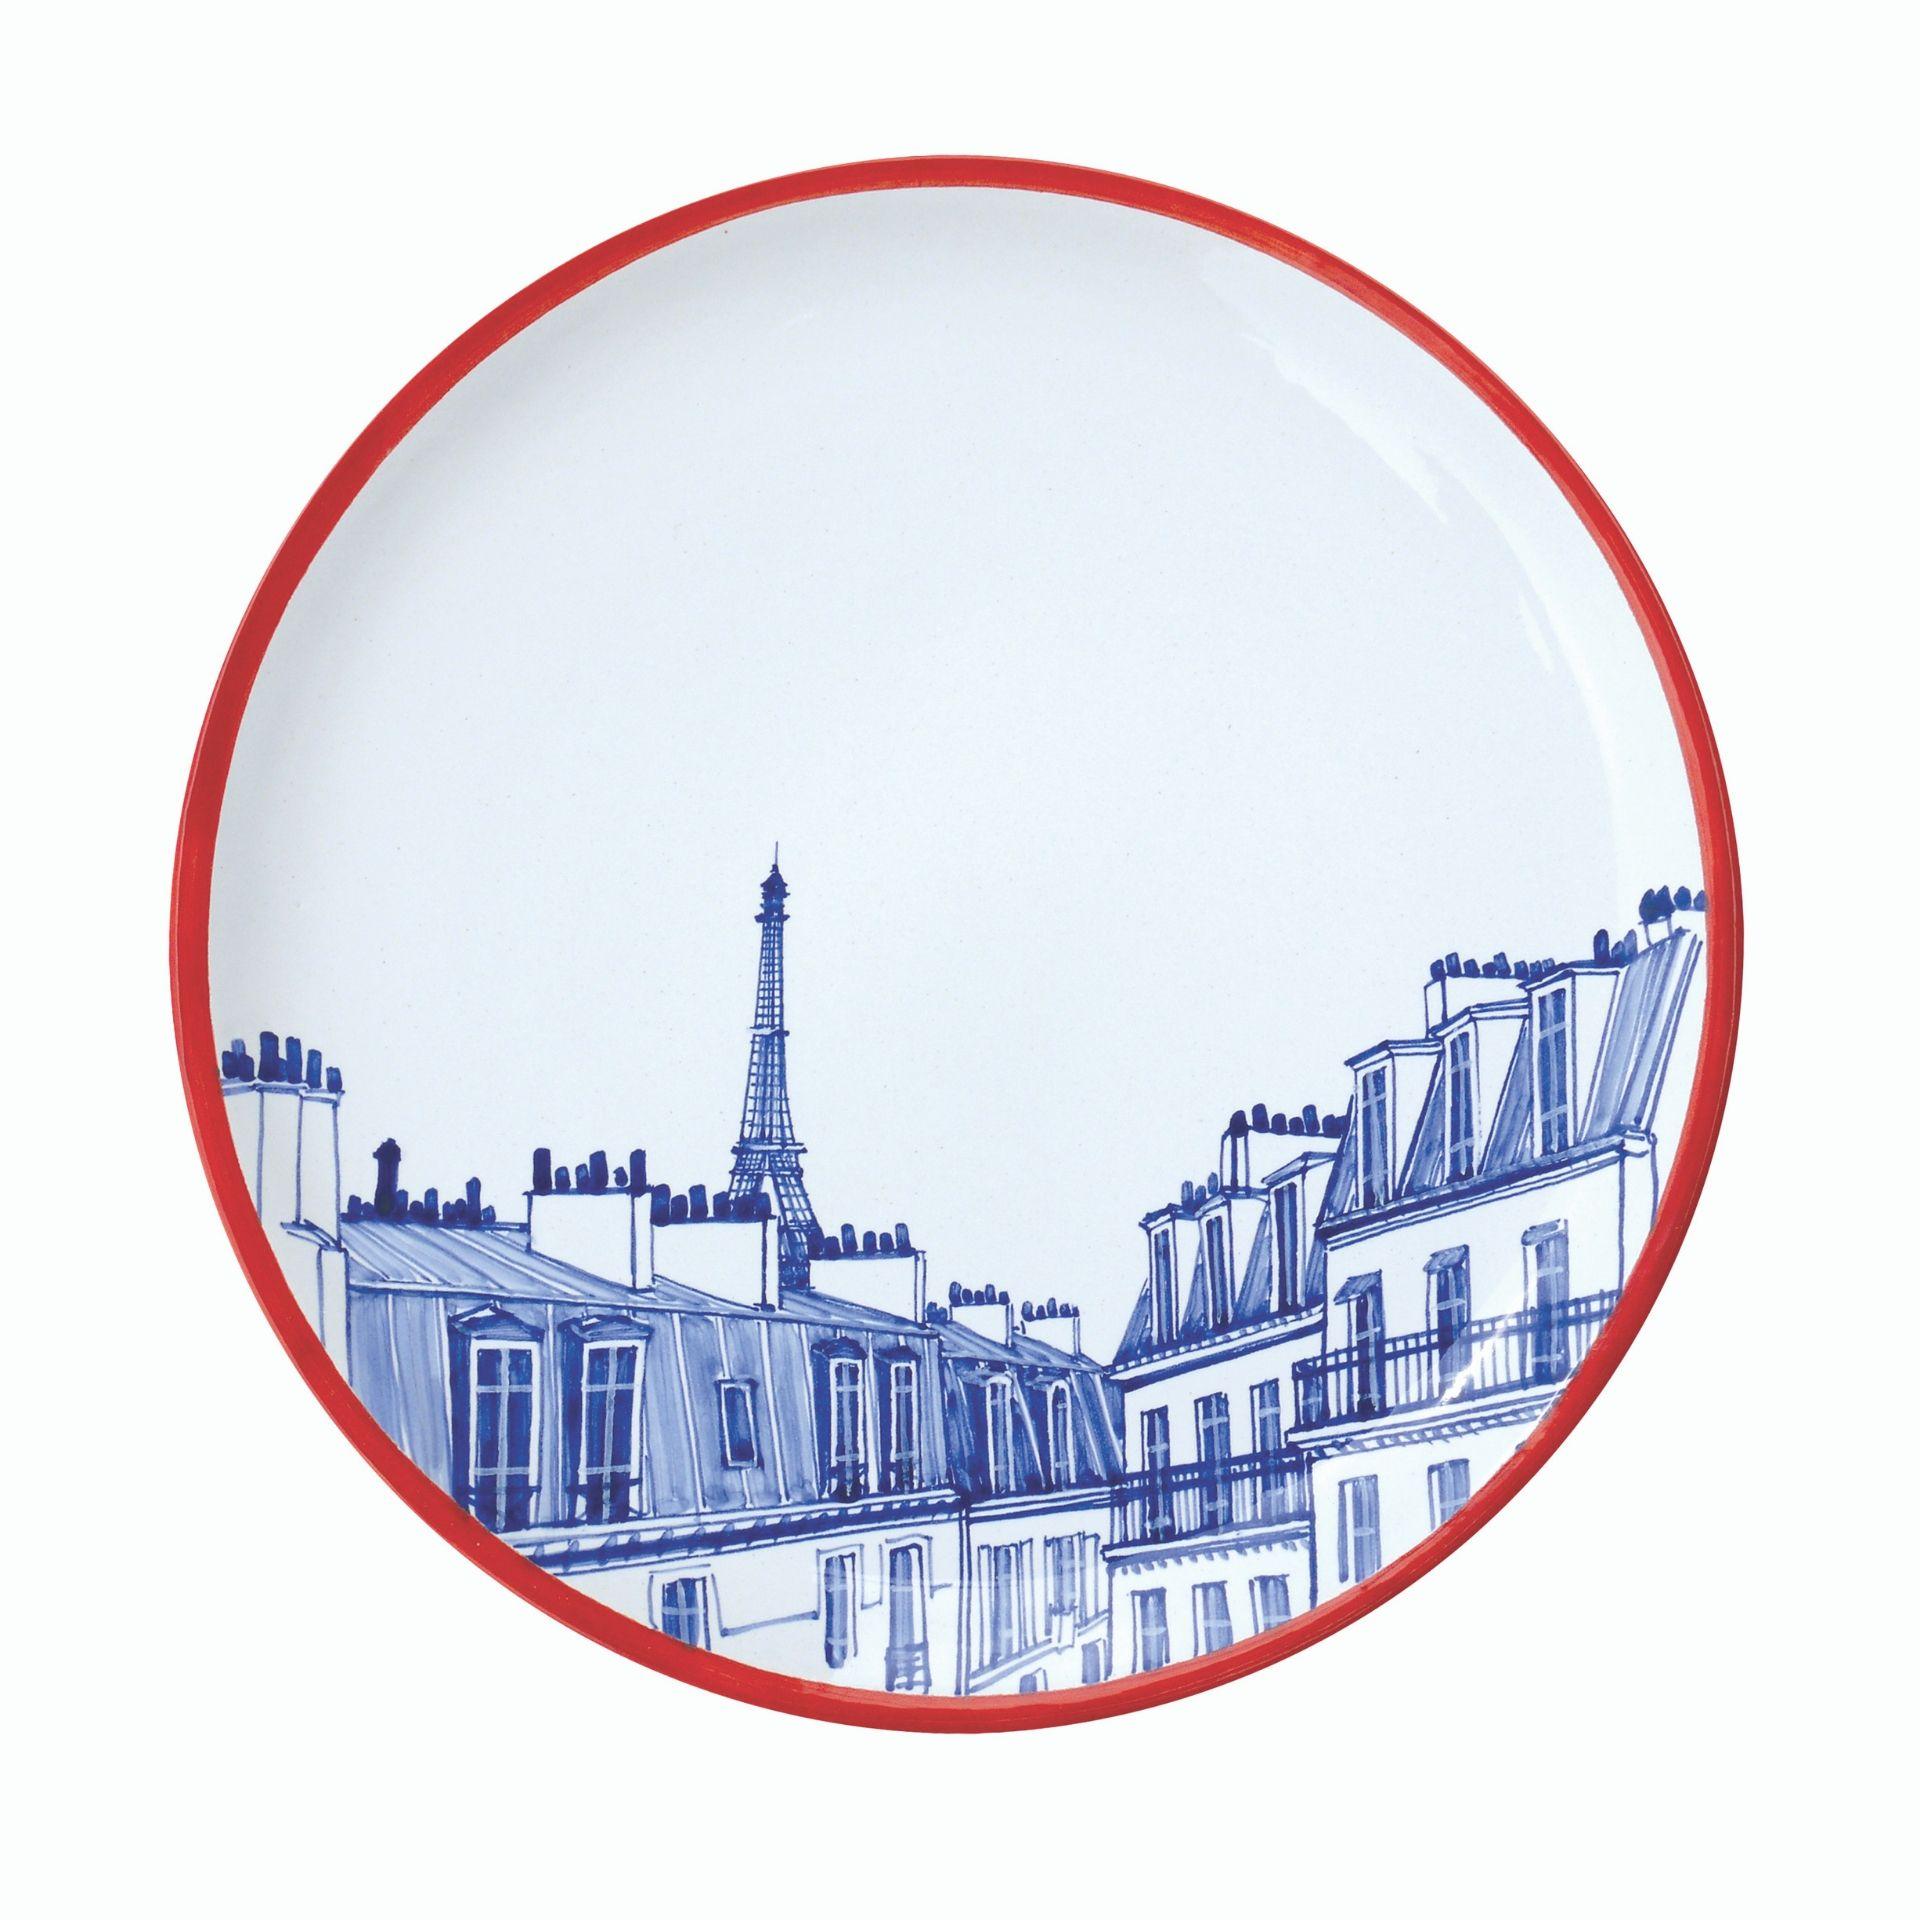 Set of 4 individually hand painted ceramic plates. Each one features a different Paris landmark: the Eiffel Tower, Montmartre, Bastille, or the Moulin Rouge. Each piece is hand painted freehand. The primary color combination of the blue décor with a